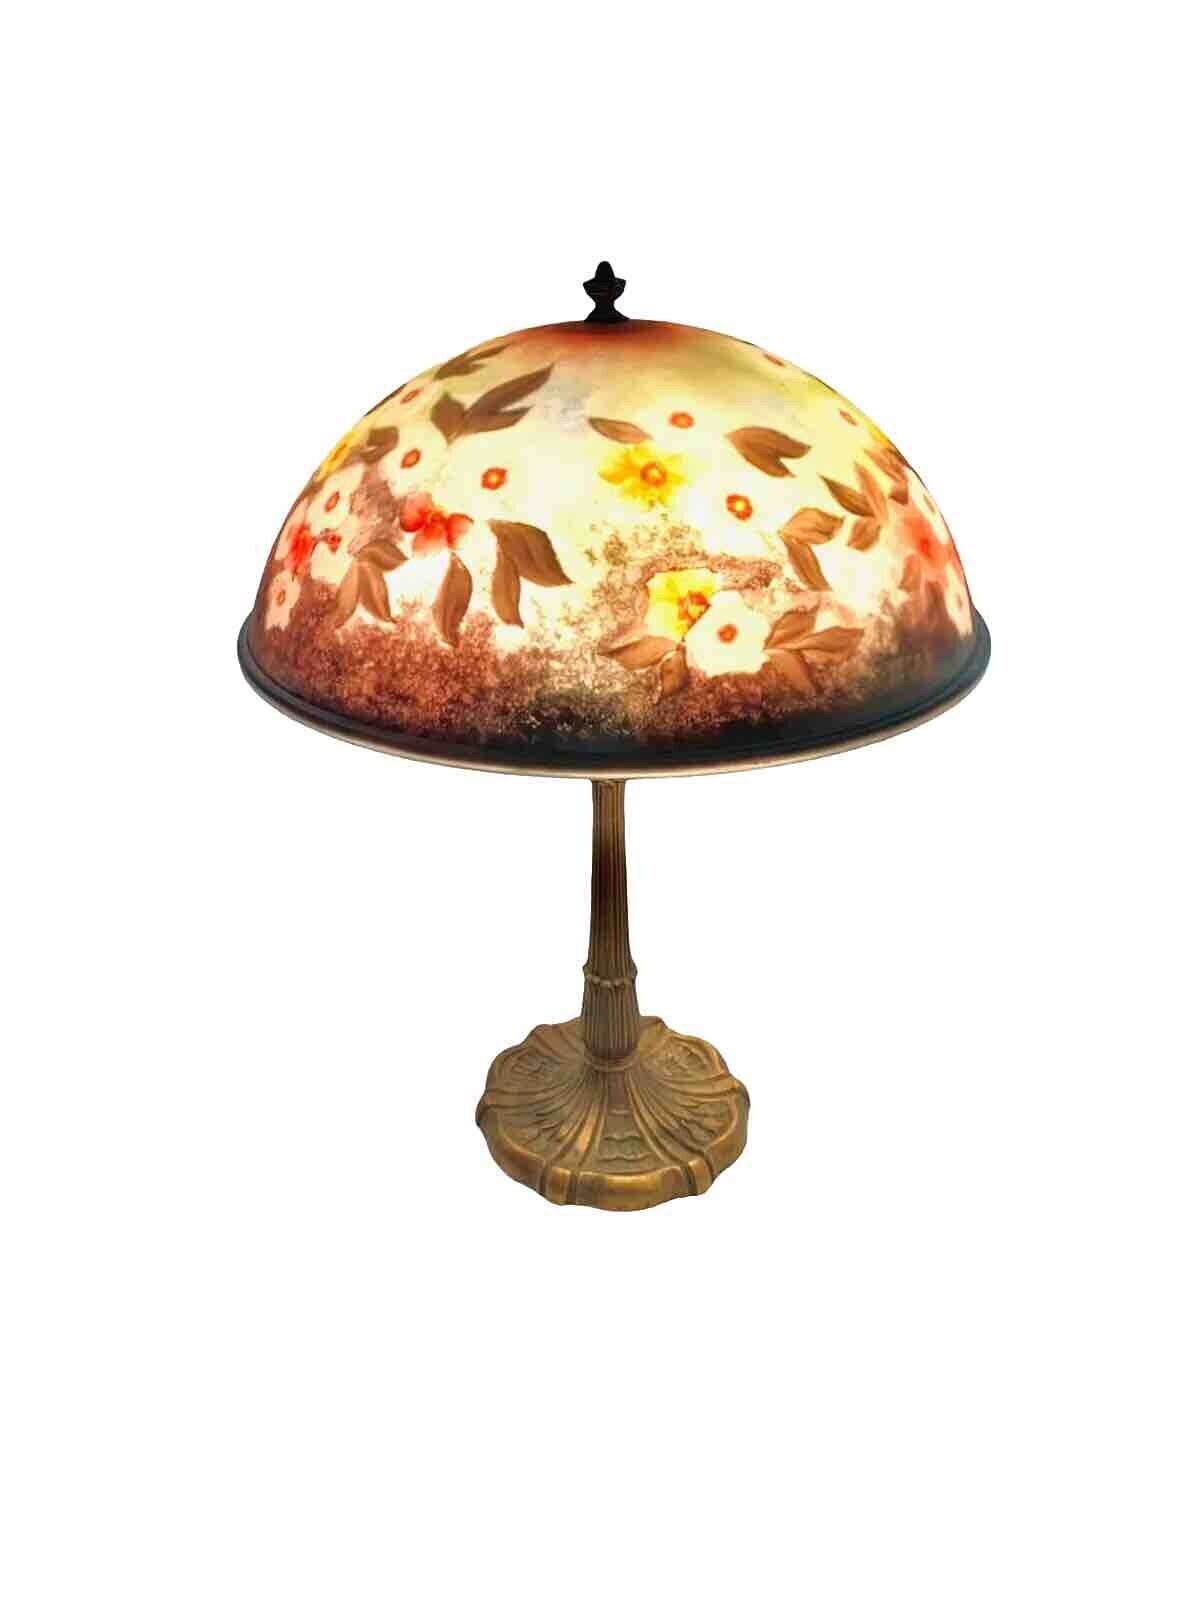 Antique Lamp Reverse Painted Flower Glass Shade Handel Design Tiffany Style